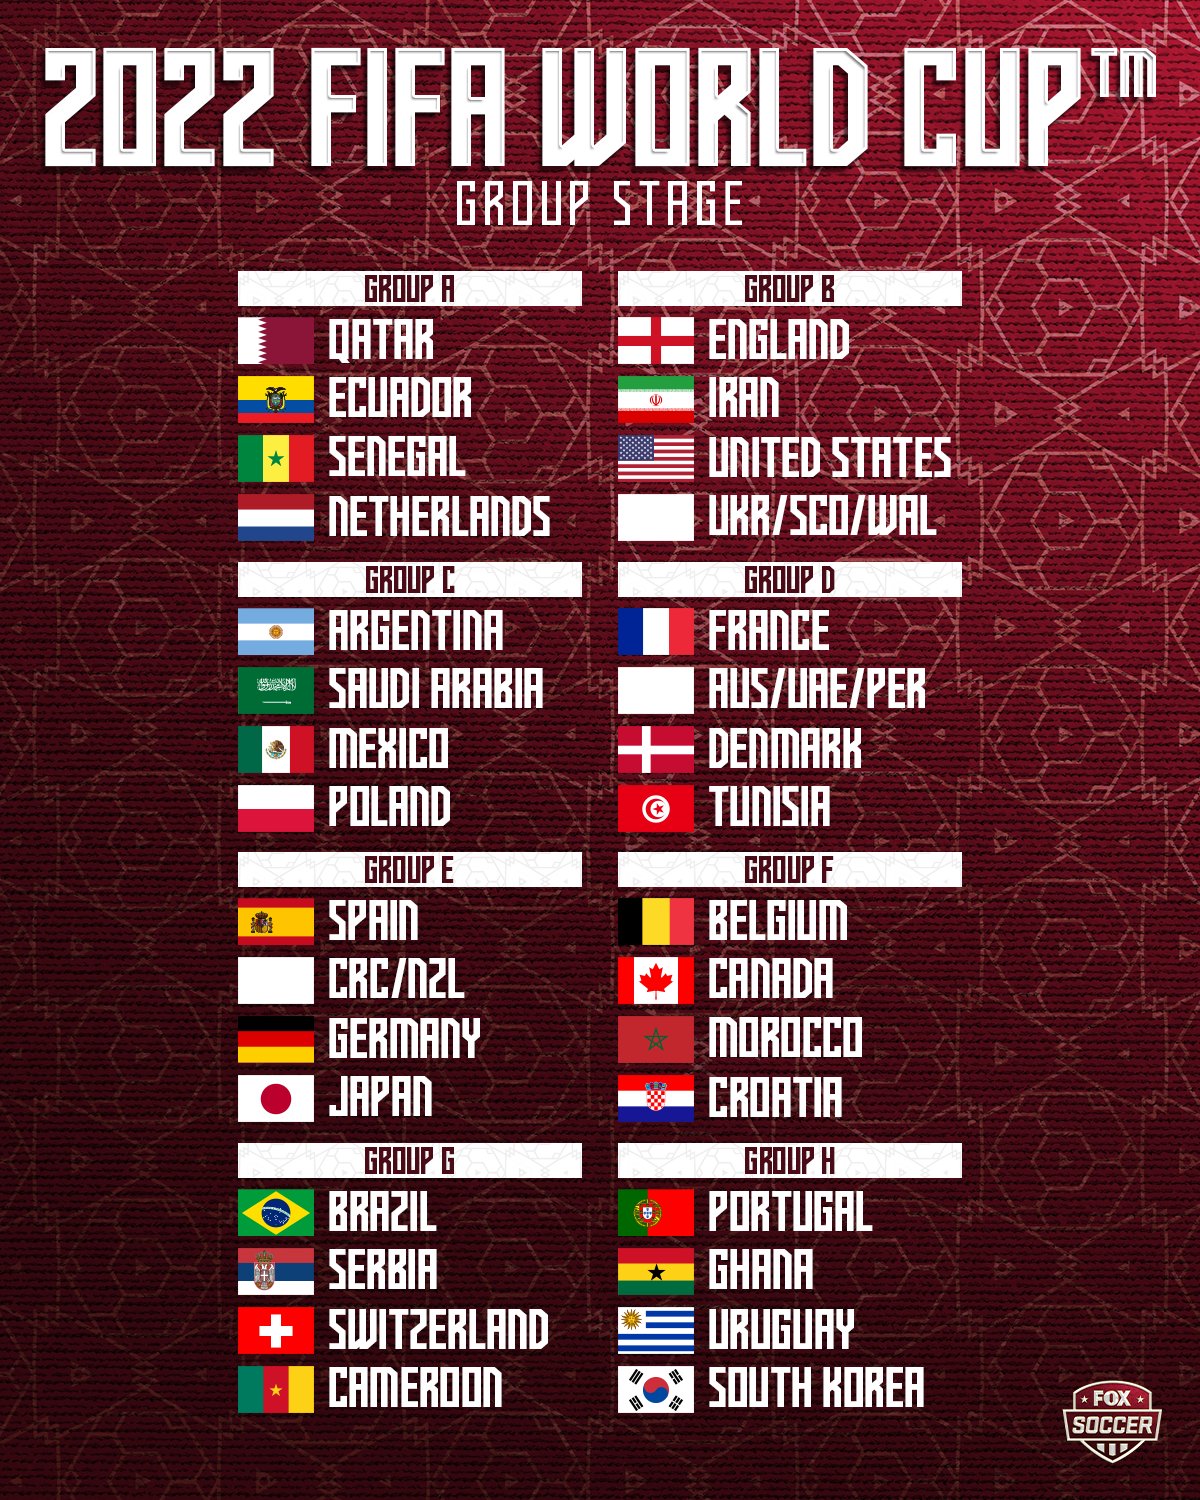 FOX Soccer on Twitter quot THE 2022 FIFA WORLD CUP GROUPS ARE SET https 